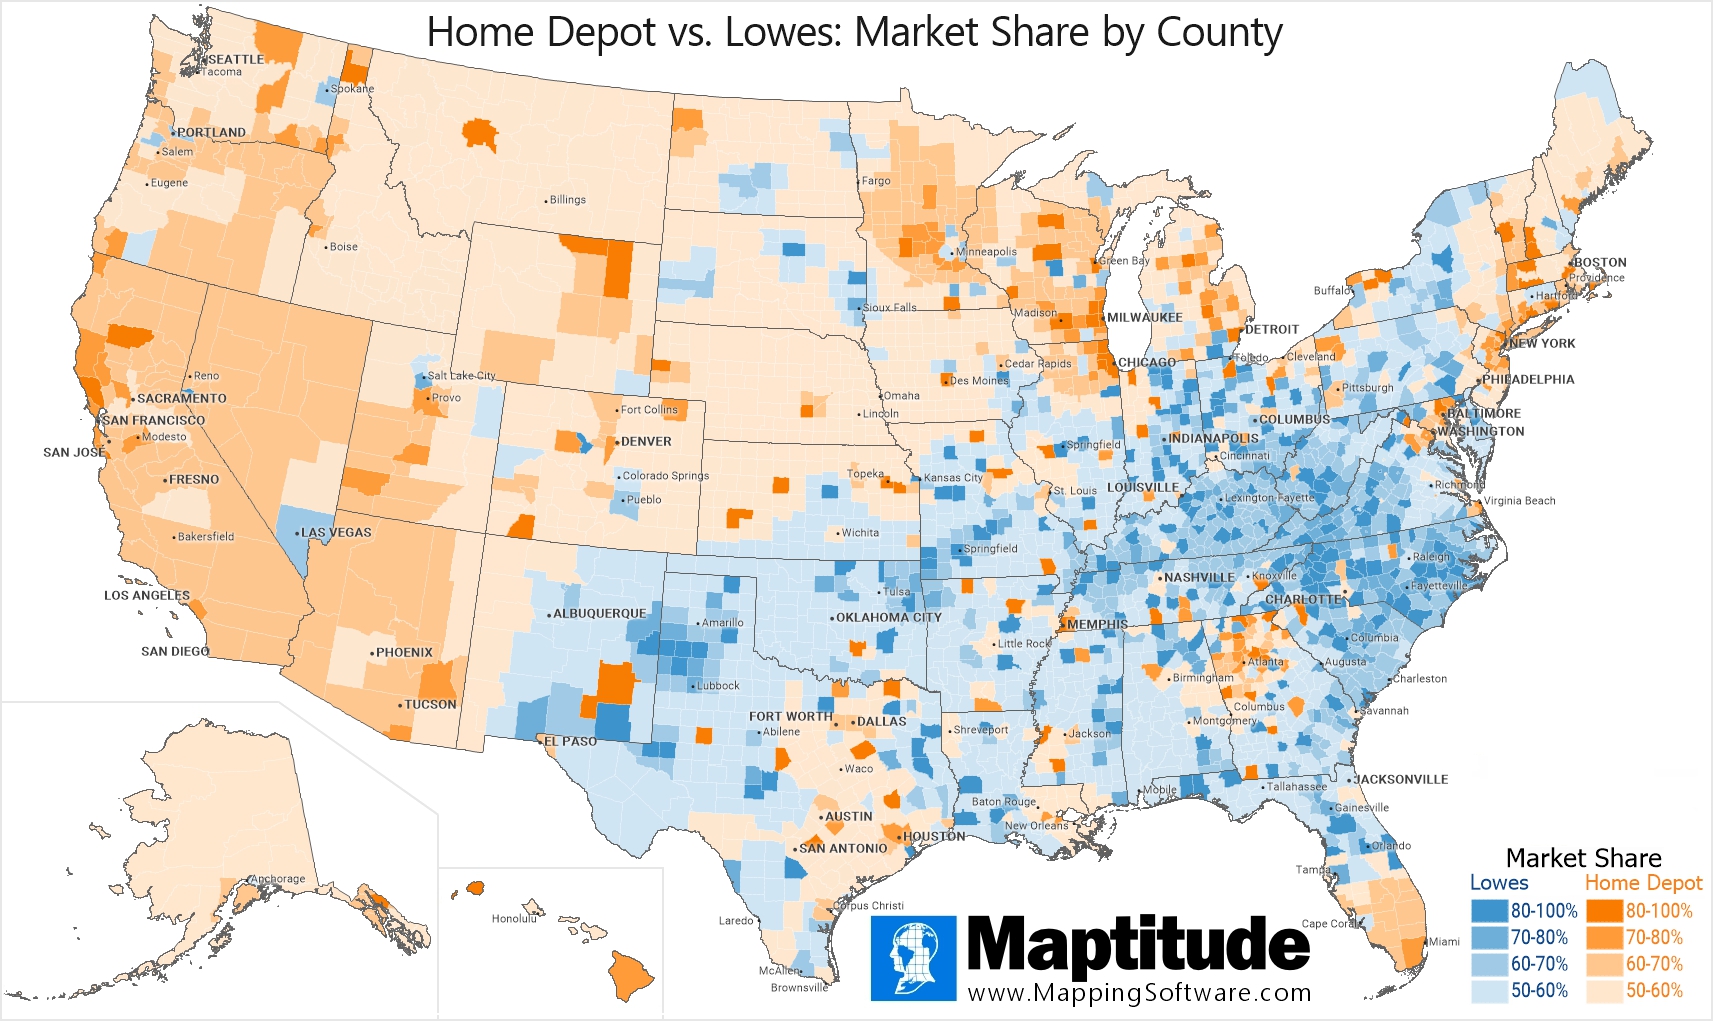 Maptitude mapping software infographic comparing the brand market share of Lowes vs. Home Depot by U.S. county